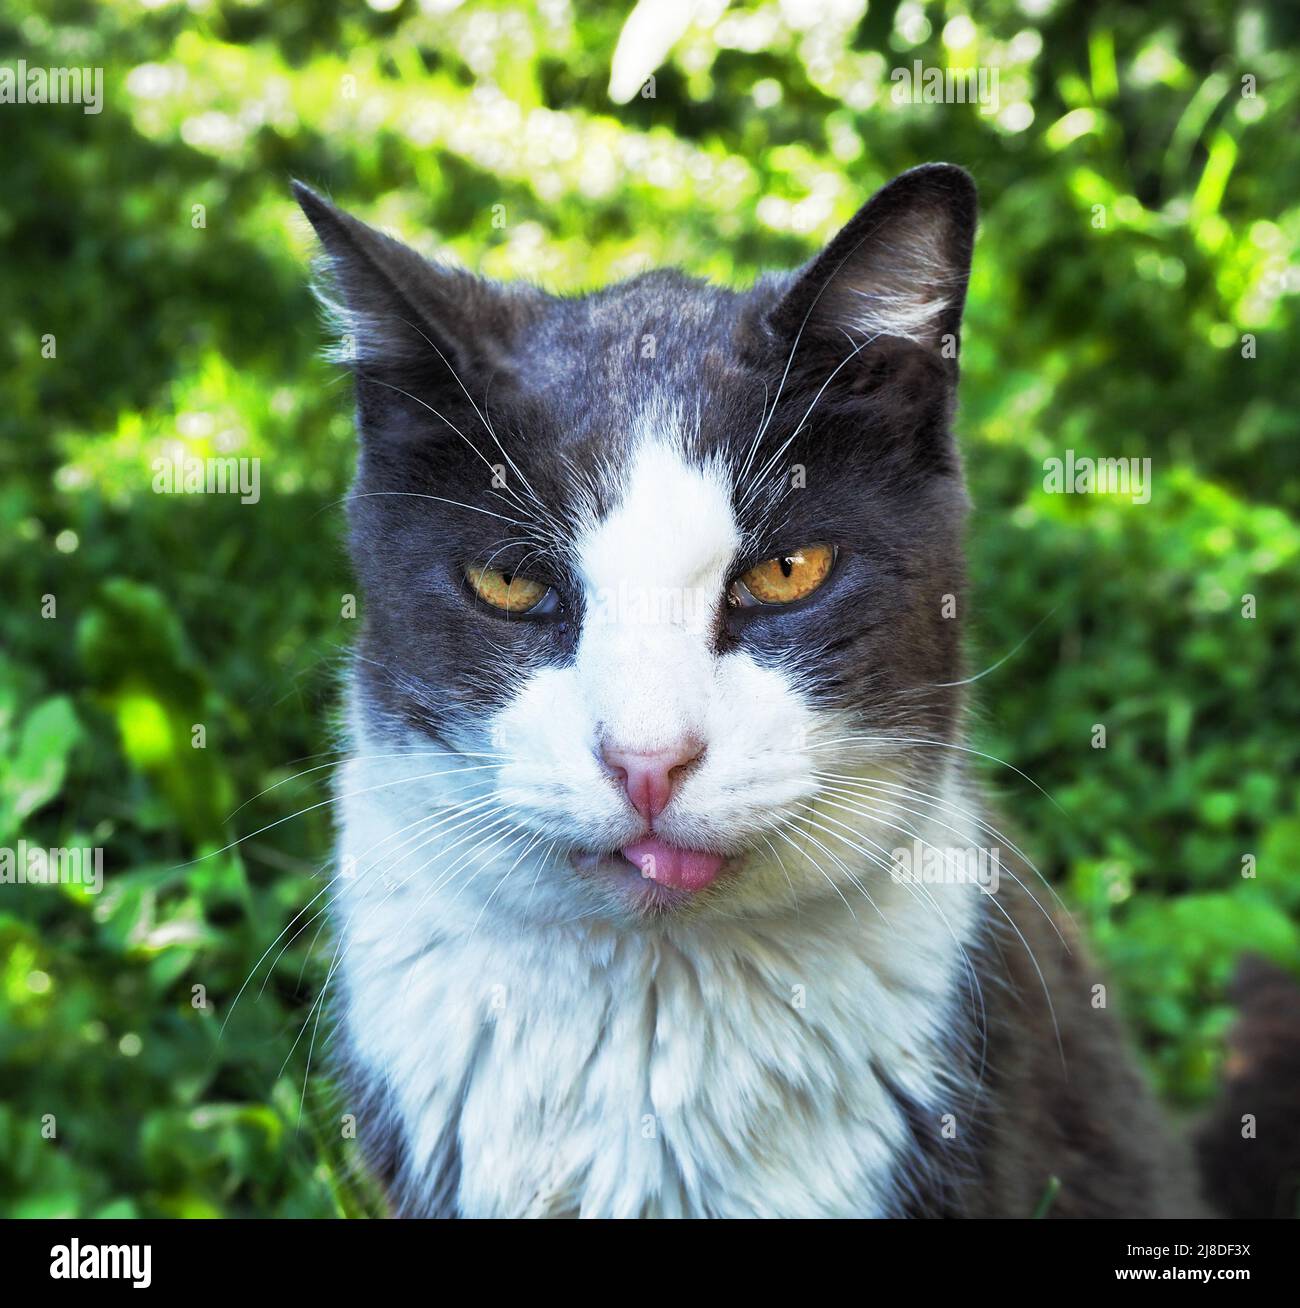 Senior male cat with tongue sticking out portrait Stock Photo